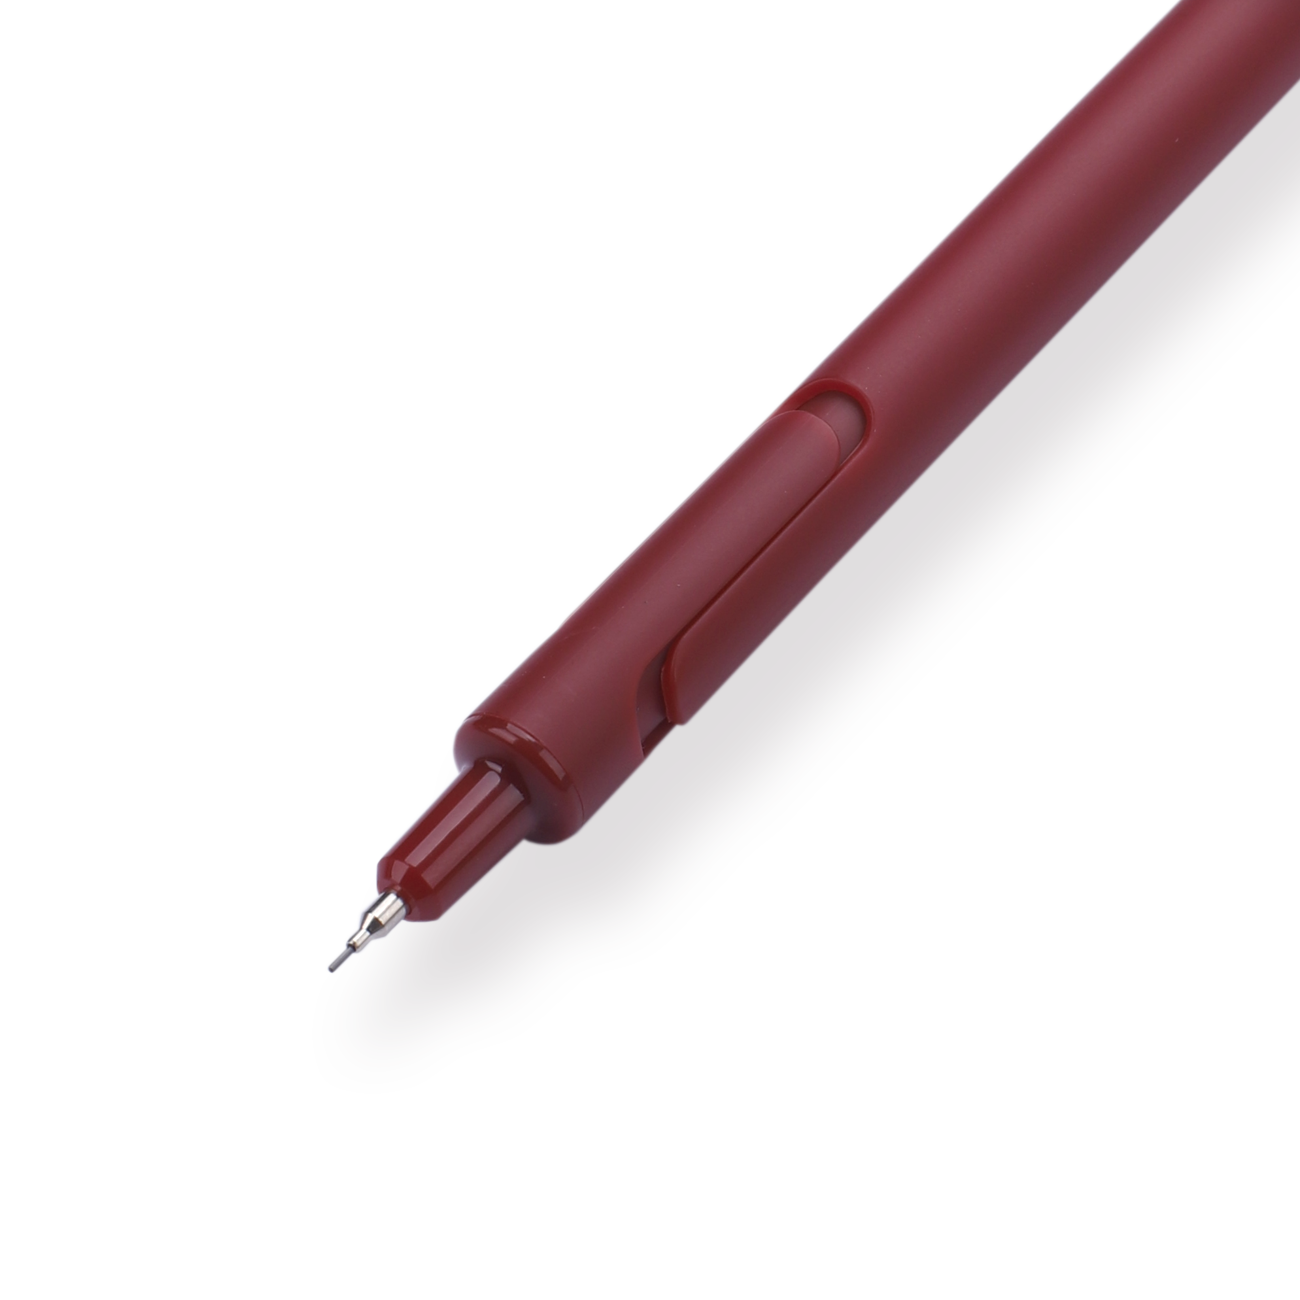 Sun-Star Topull S Mechanical Pencil - 0.5 mm - Red - Stationery Pal